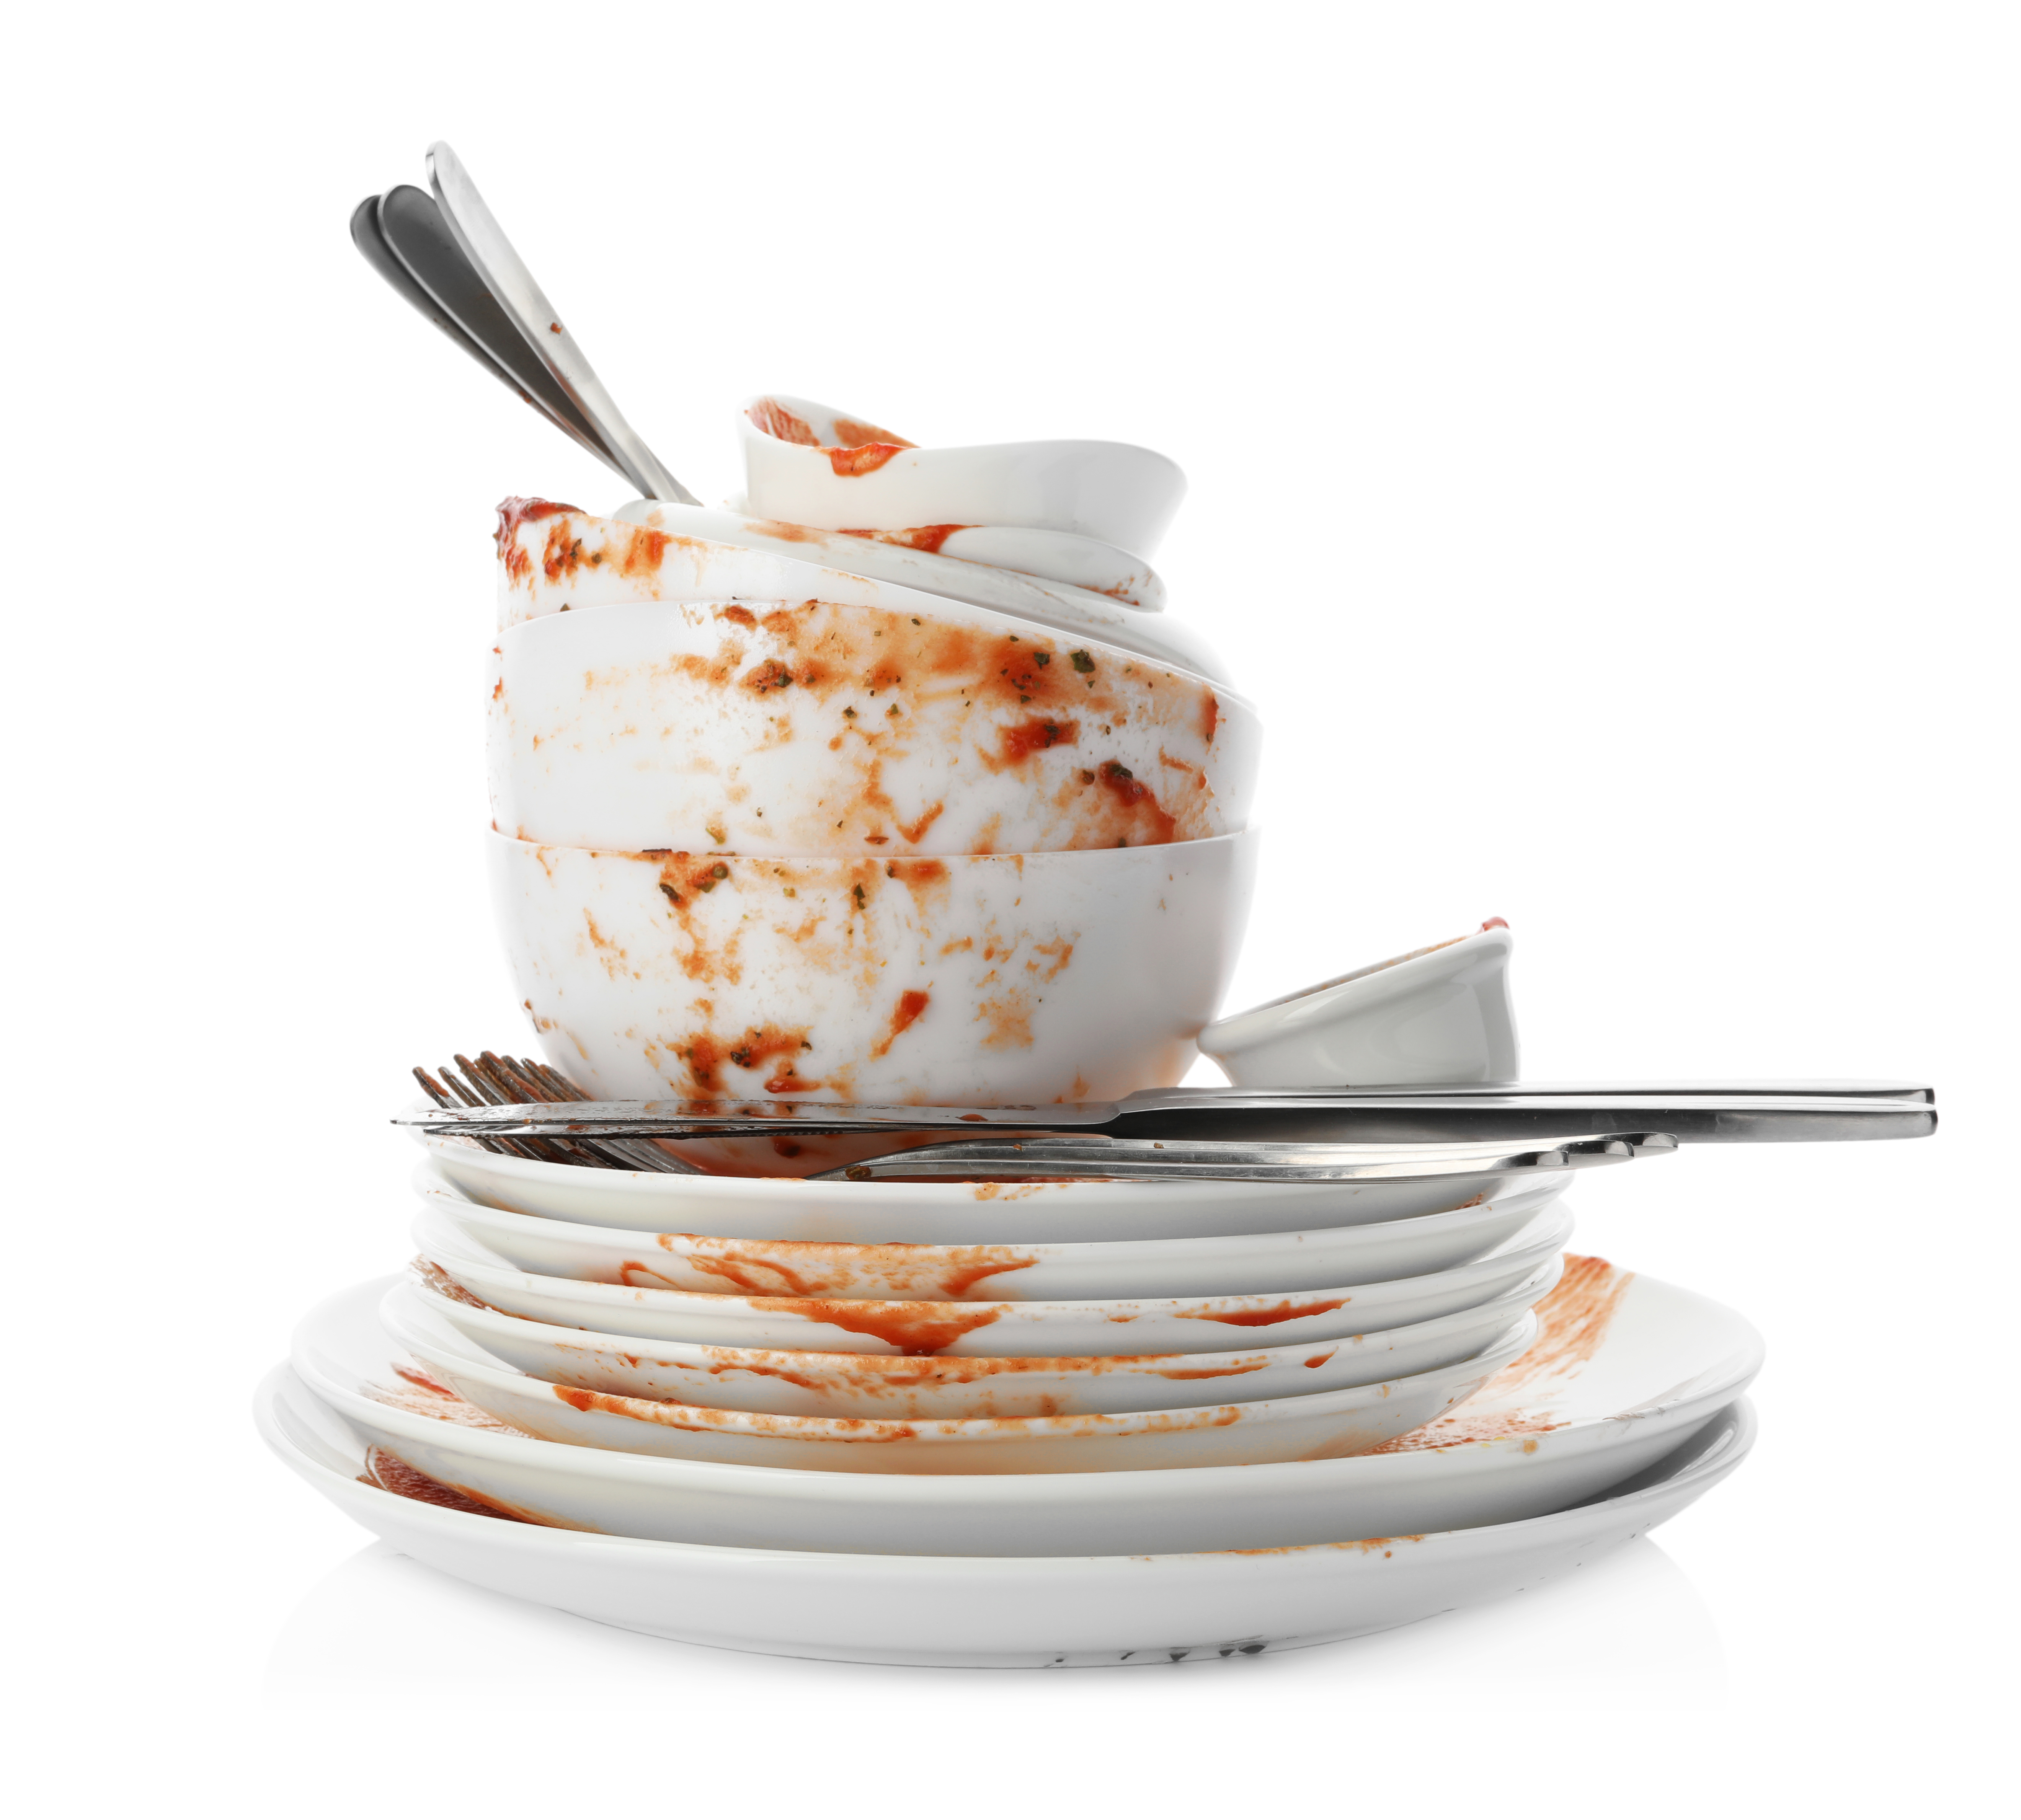 A pile of dirty dishes | Source: Shutterstock